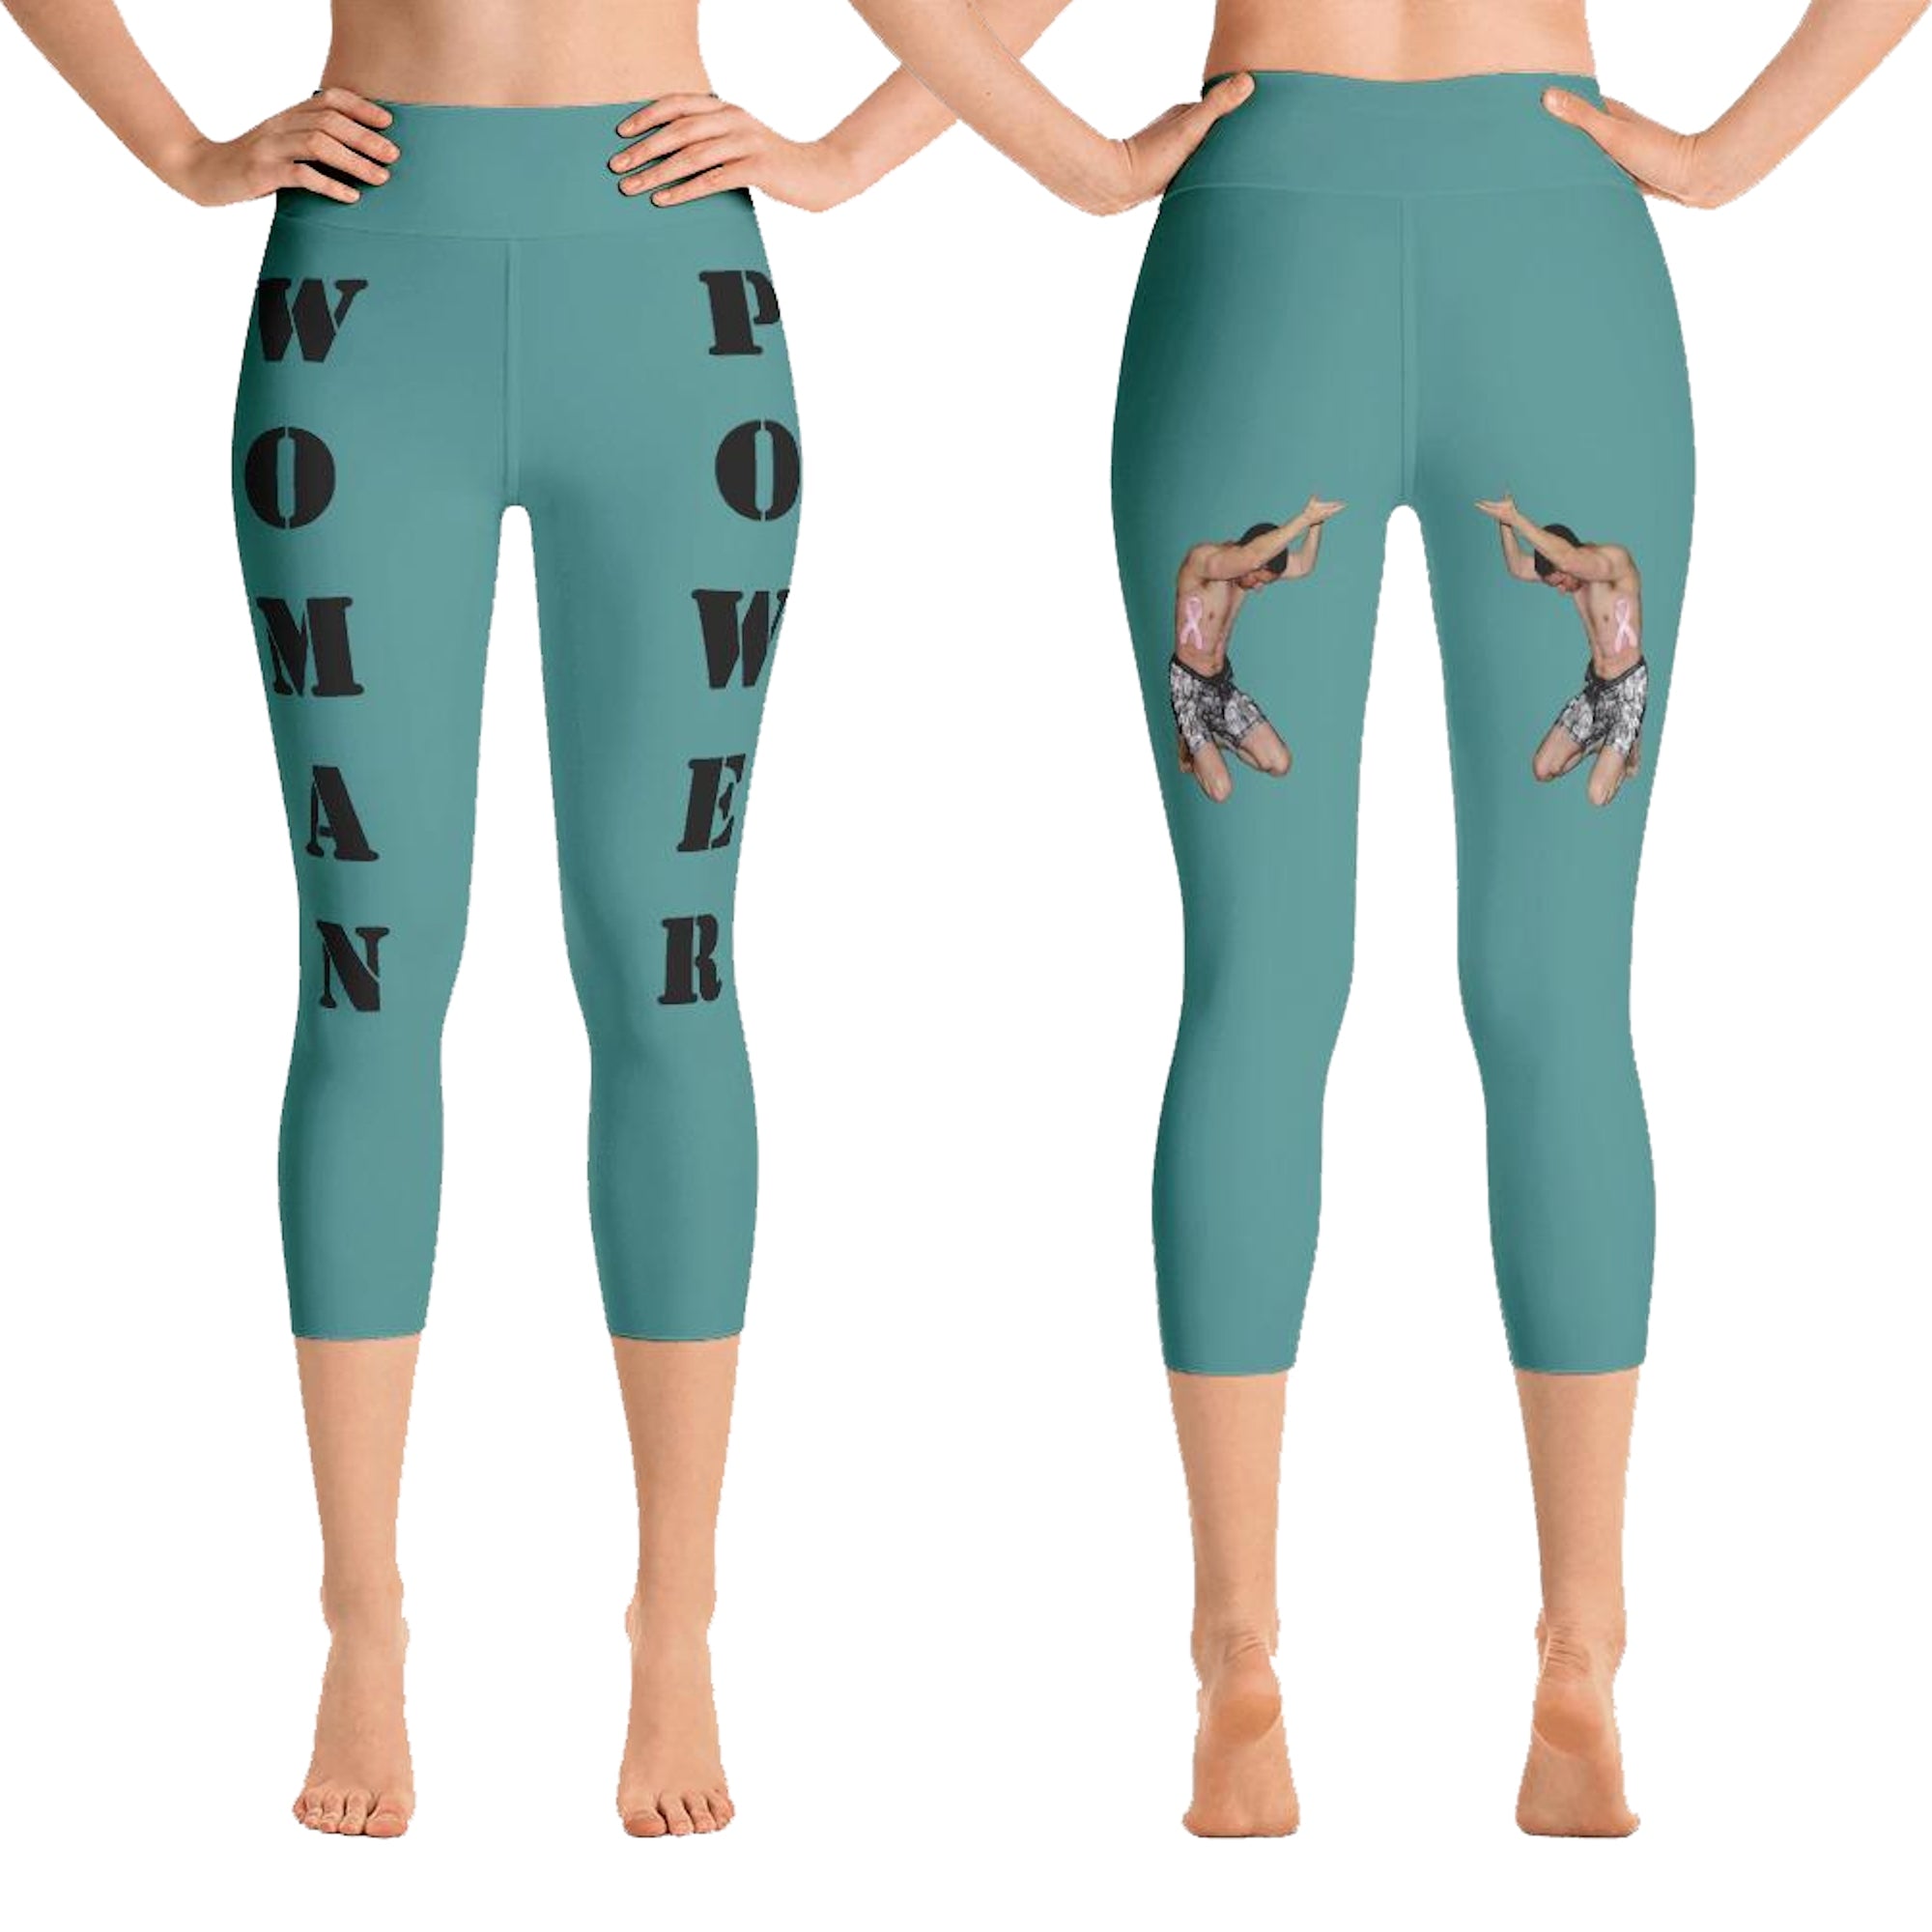 Our best viral yoga capri leggings with woman power - Teal Color